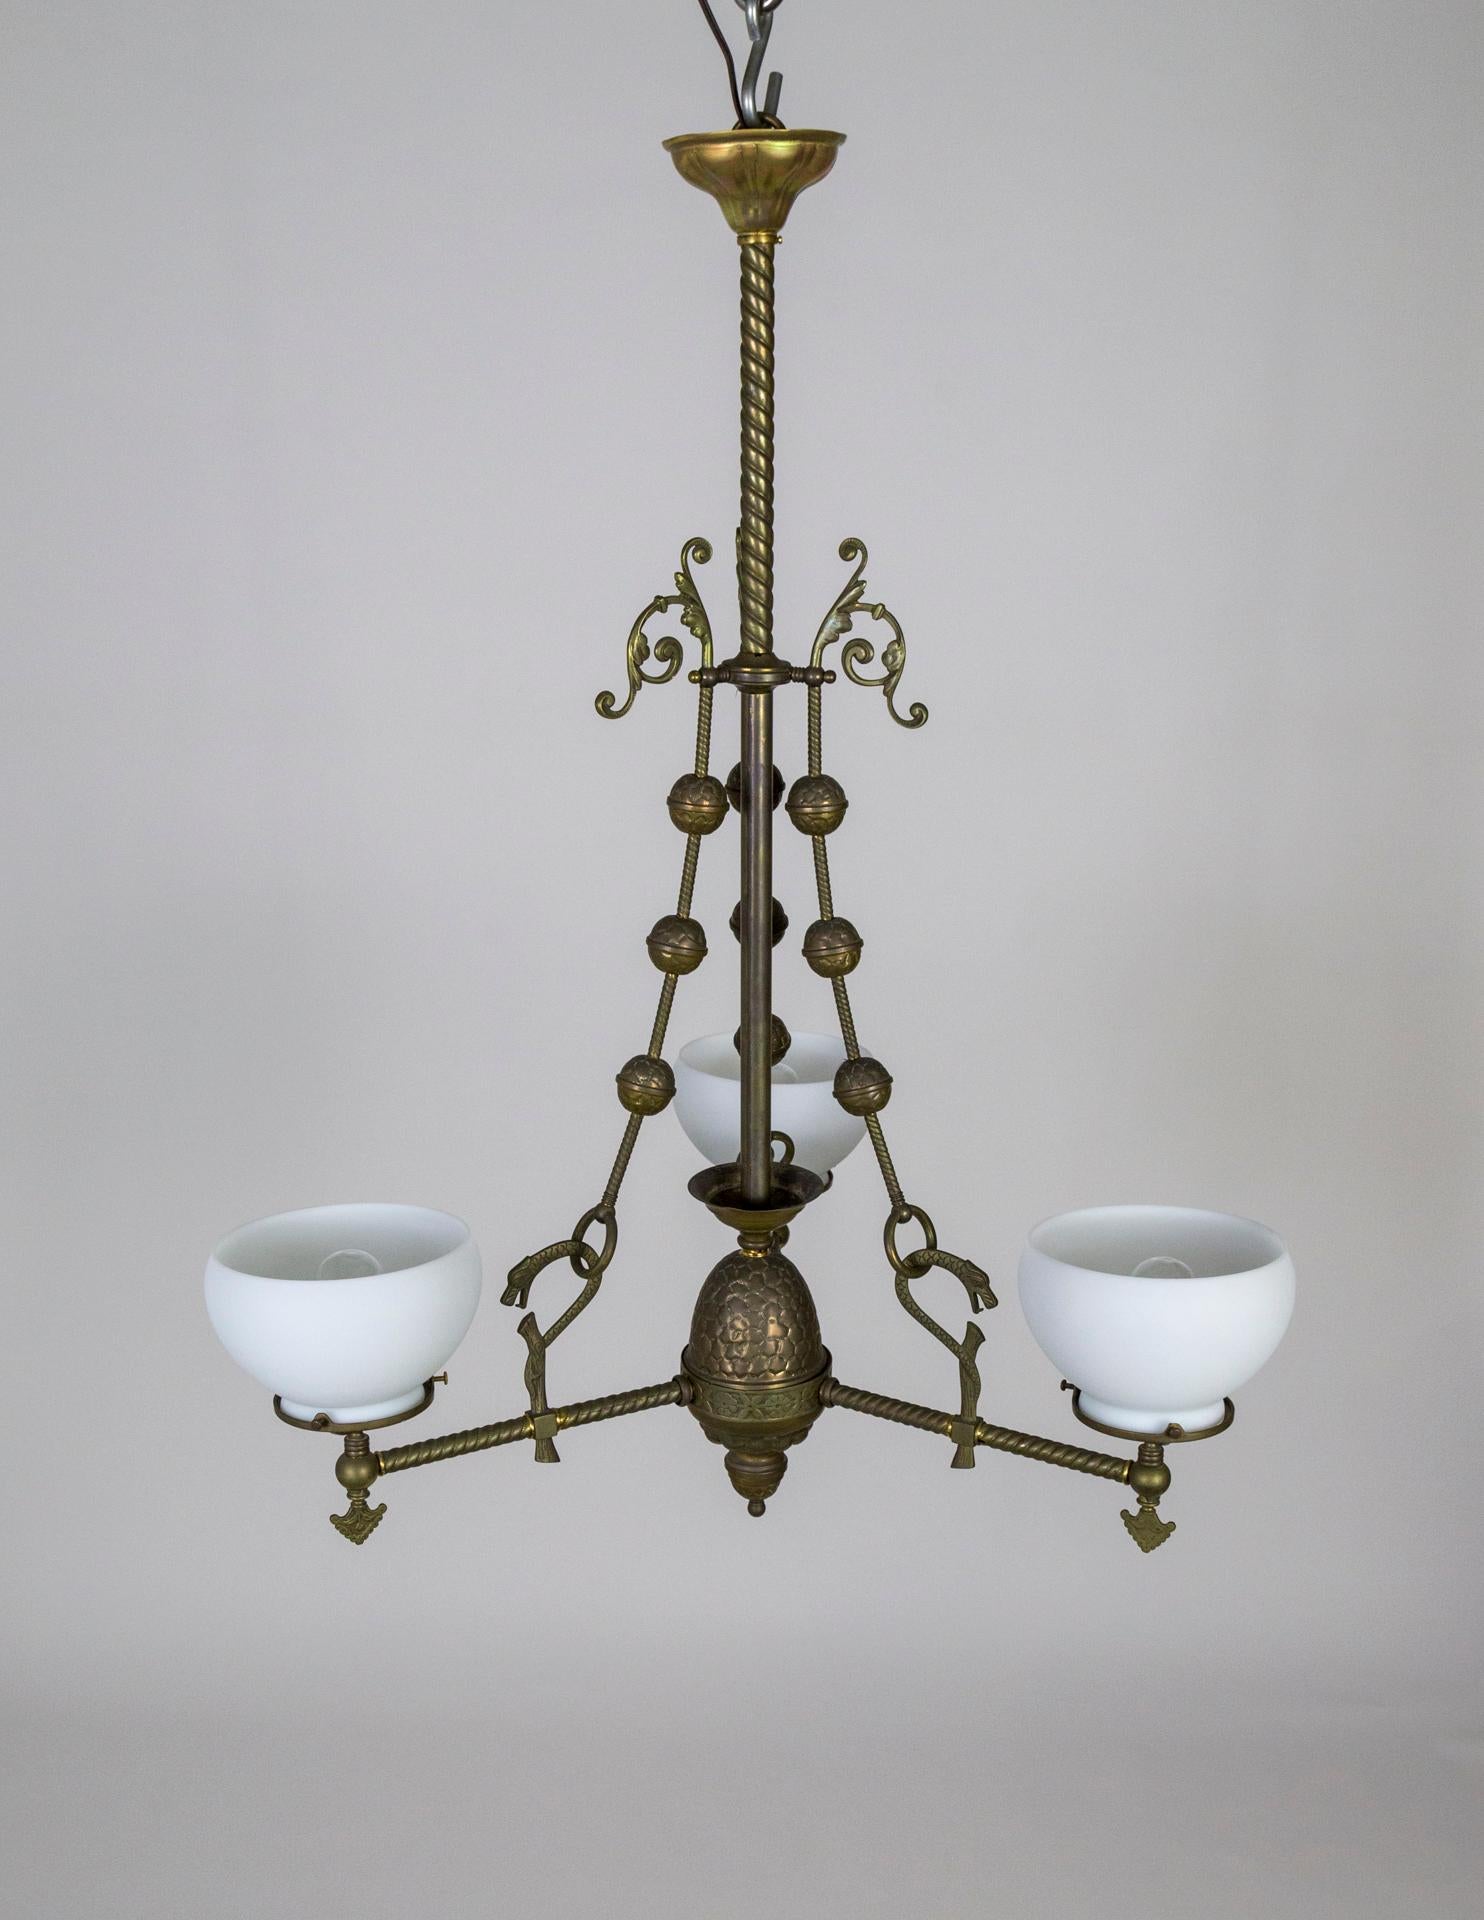 19th Century Intricately Detailed Late Victorian Gas 3-Light Chandelier '2 available'